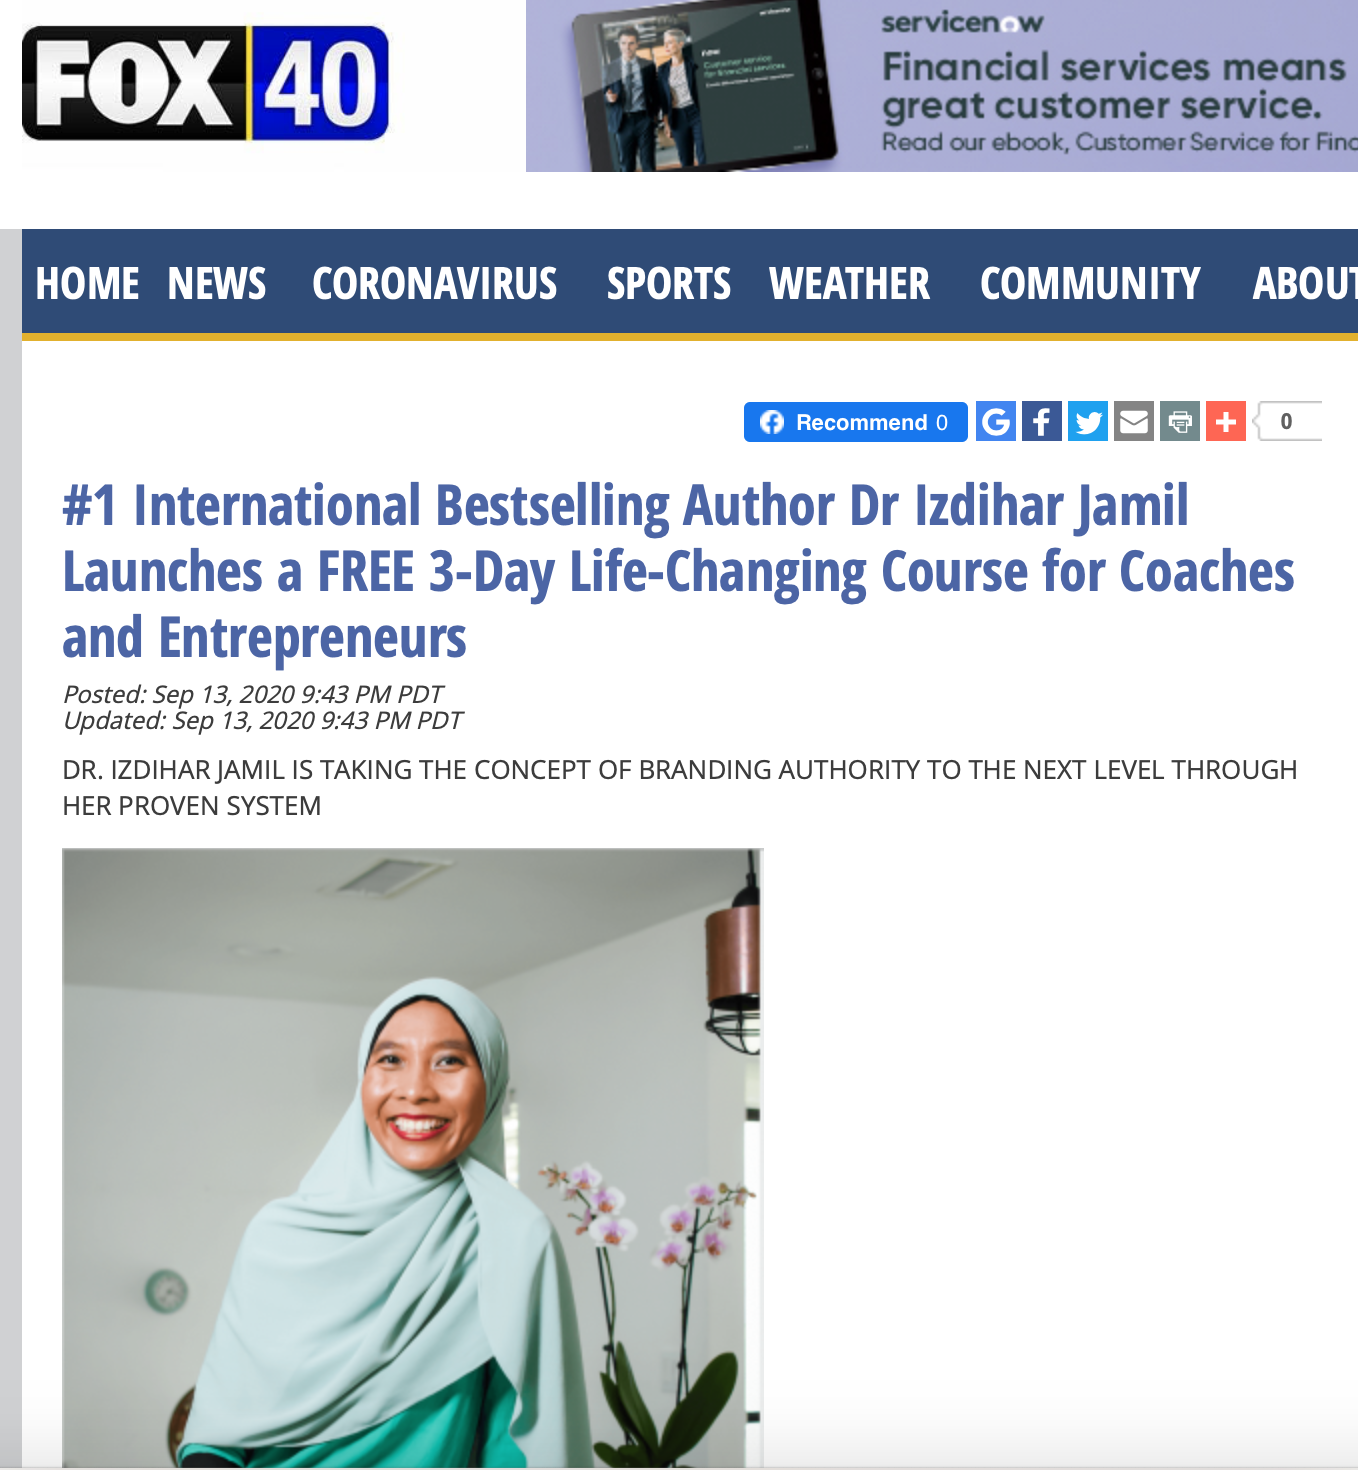 Dr Izdihar Jamil was featured on FOX announcing her life changing course.